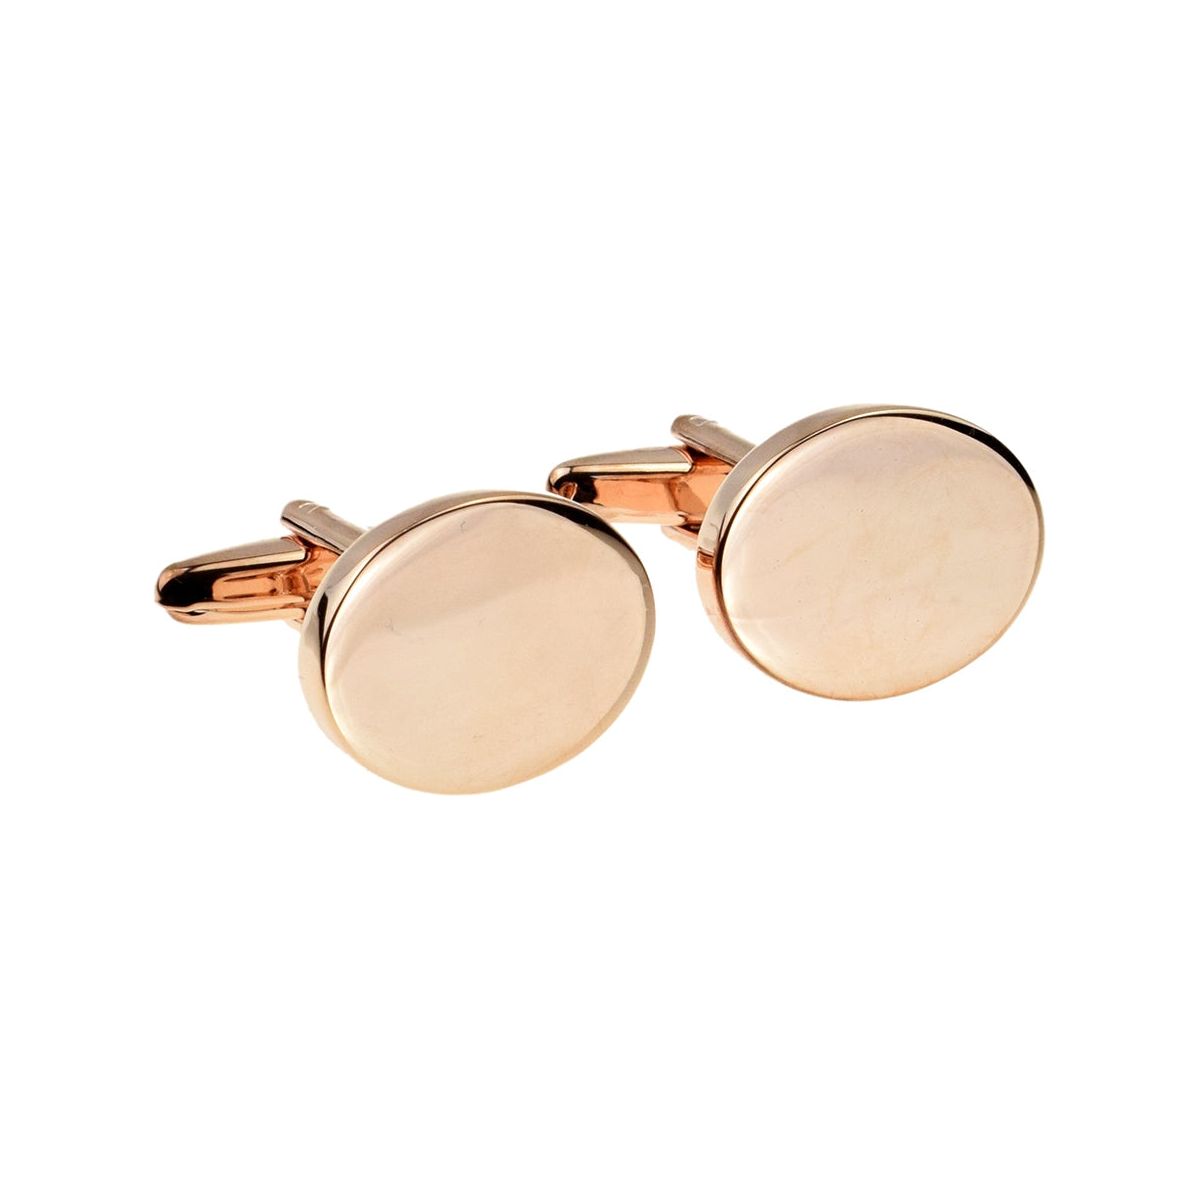 Engraved Plain Rose Gold Oval Cufflinks - Ashton and Finch